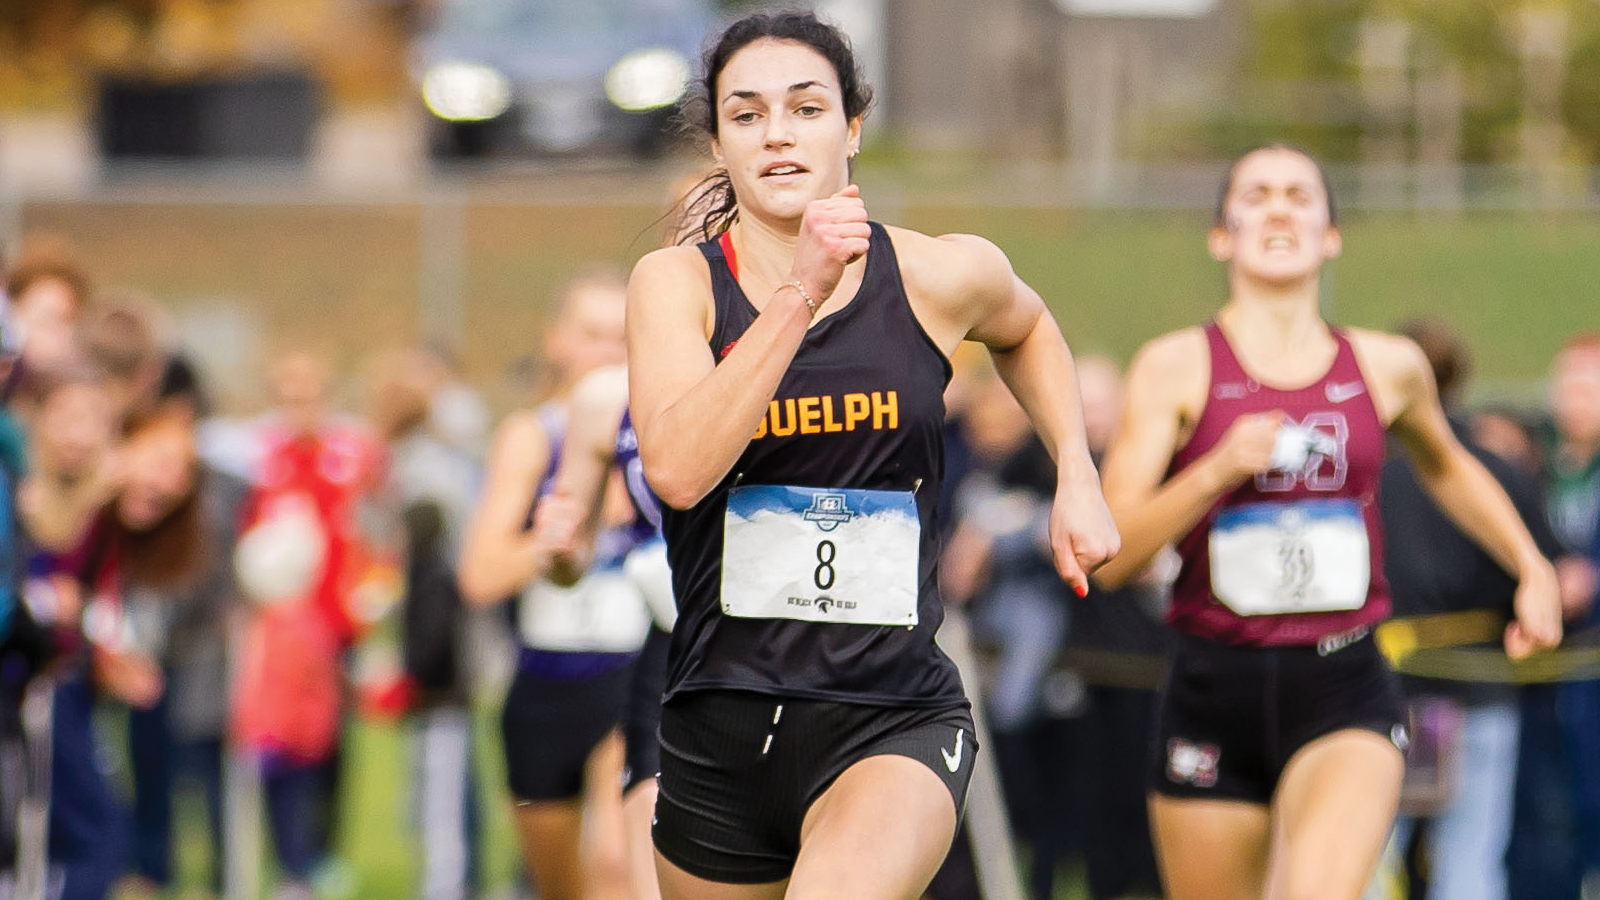 Guelph women's cross country runner Julia Agostinelli running on course ahead of her competitors during the OUA Championships